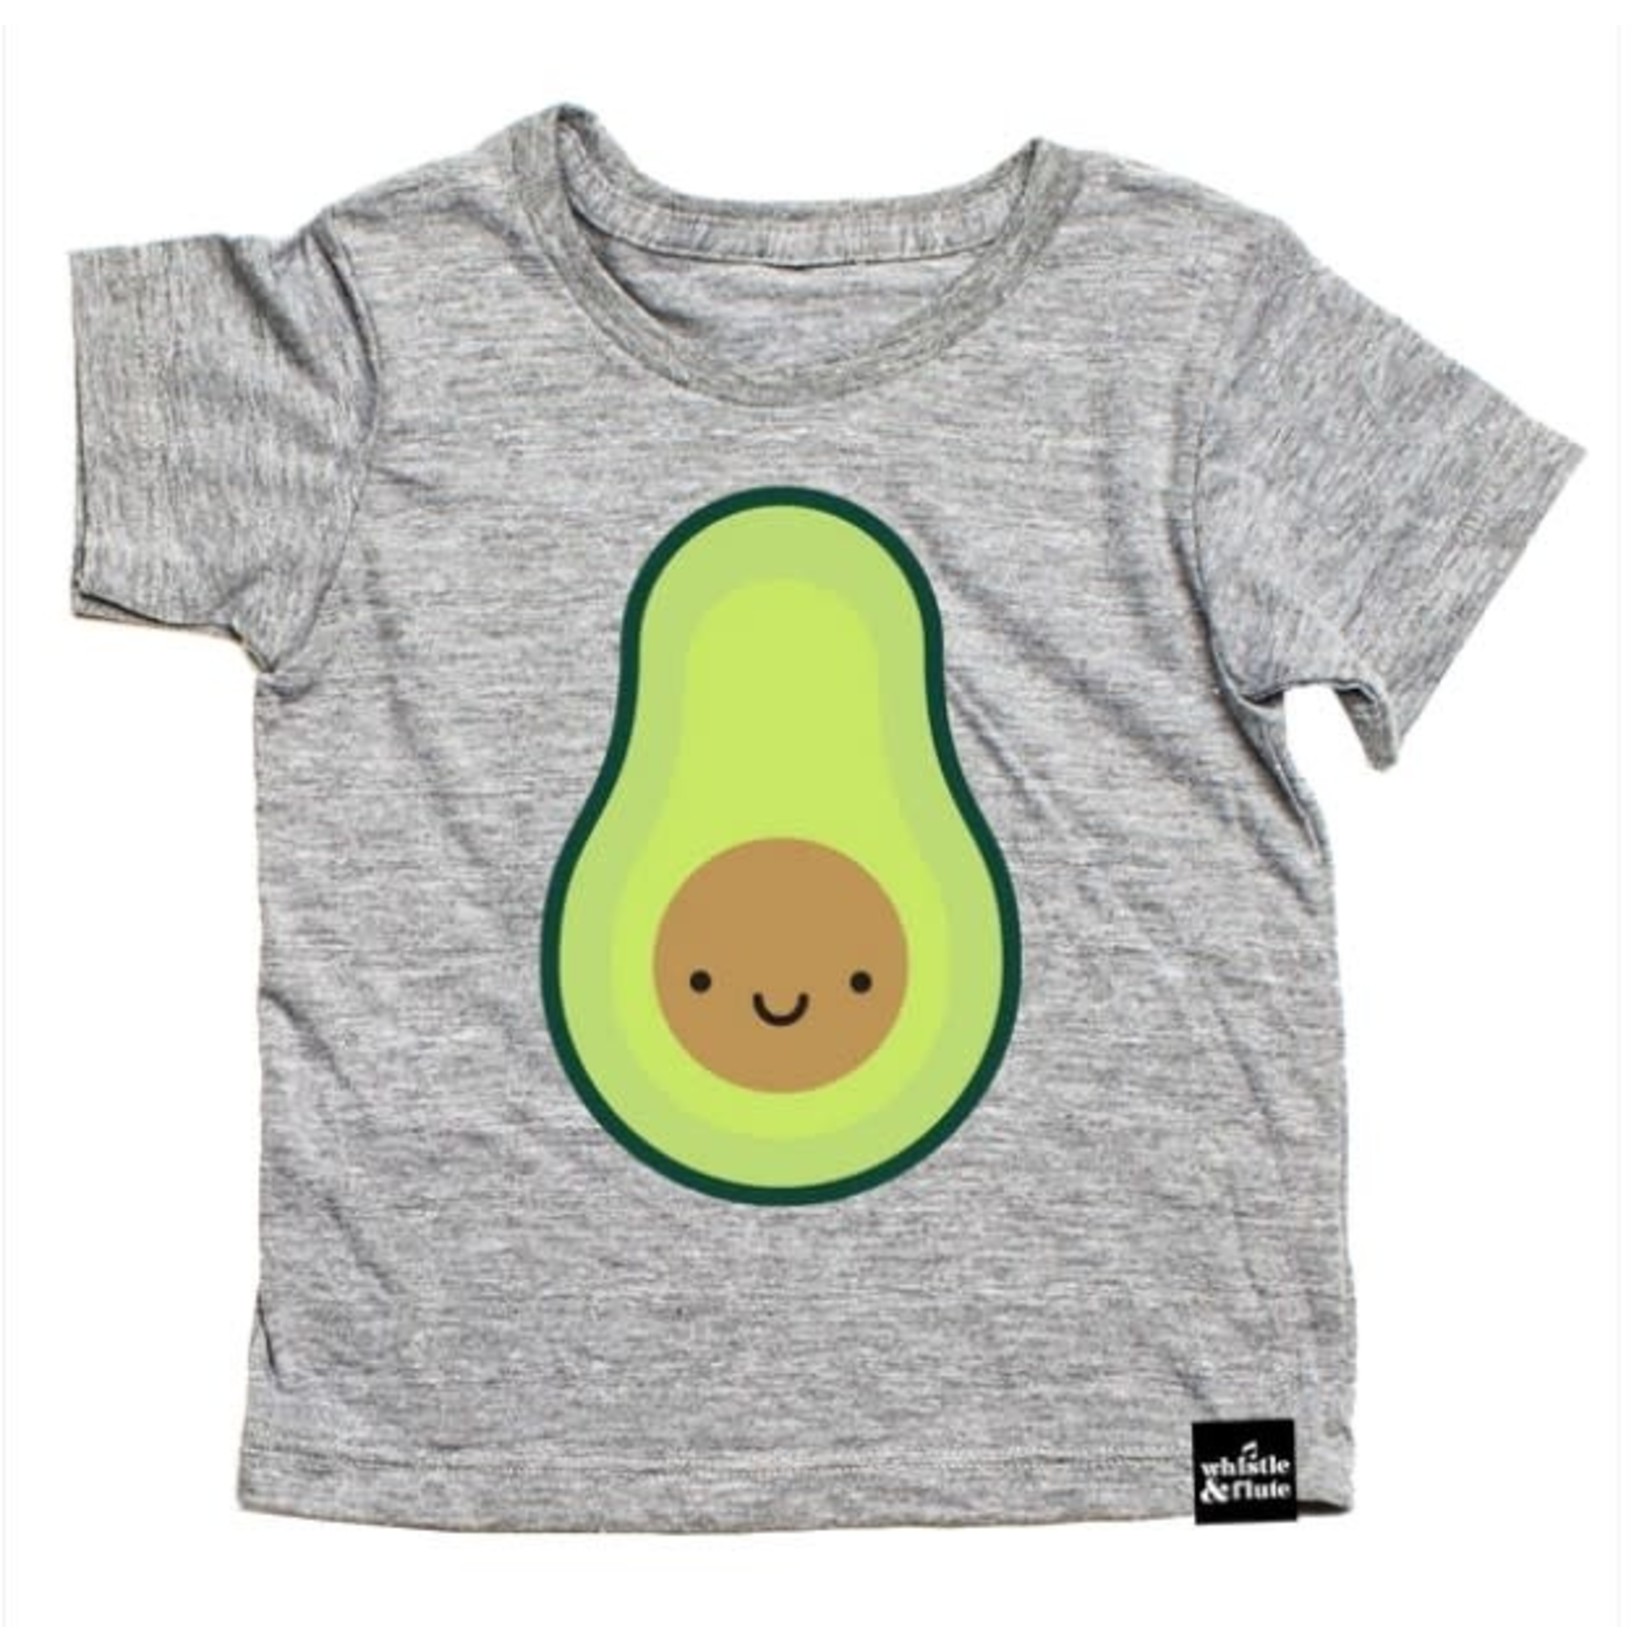 Whistle & Flute WHISTLE AND FLUTE - T-shirt gris à manches courtes 'Kawaii - Avocado'